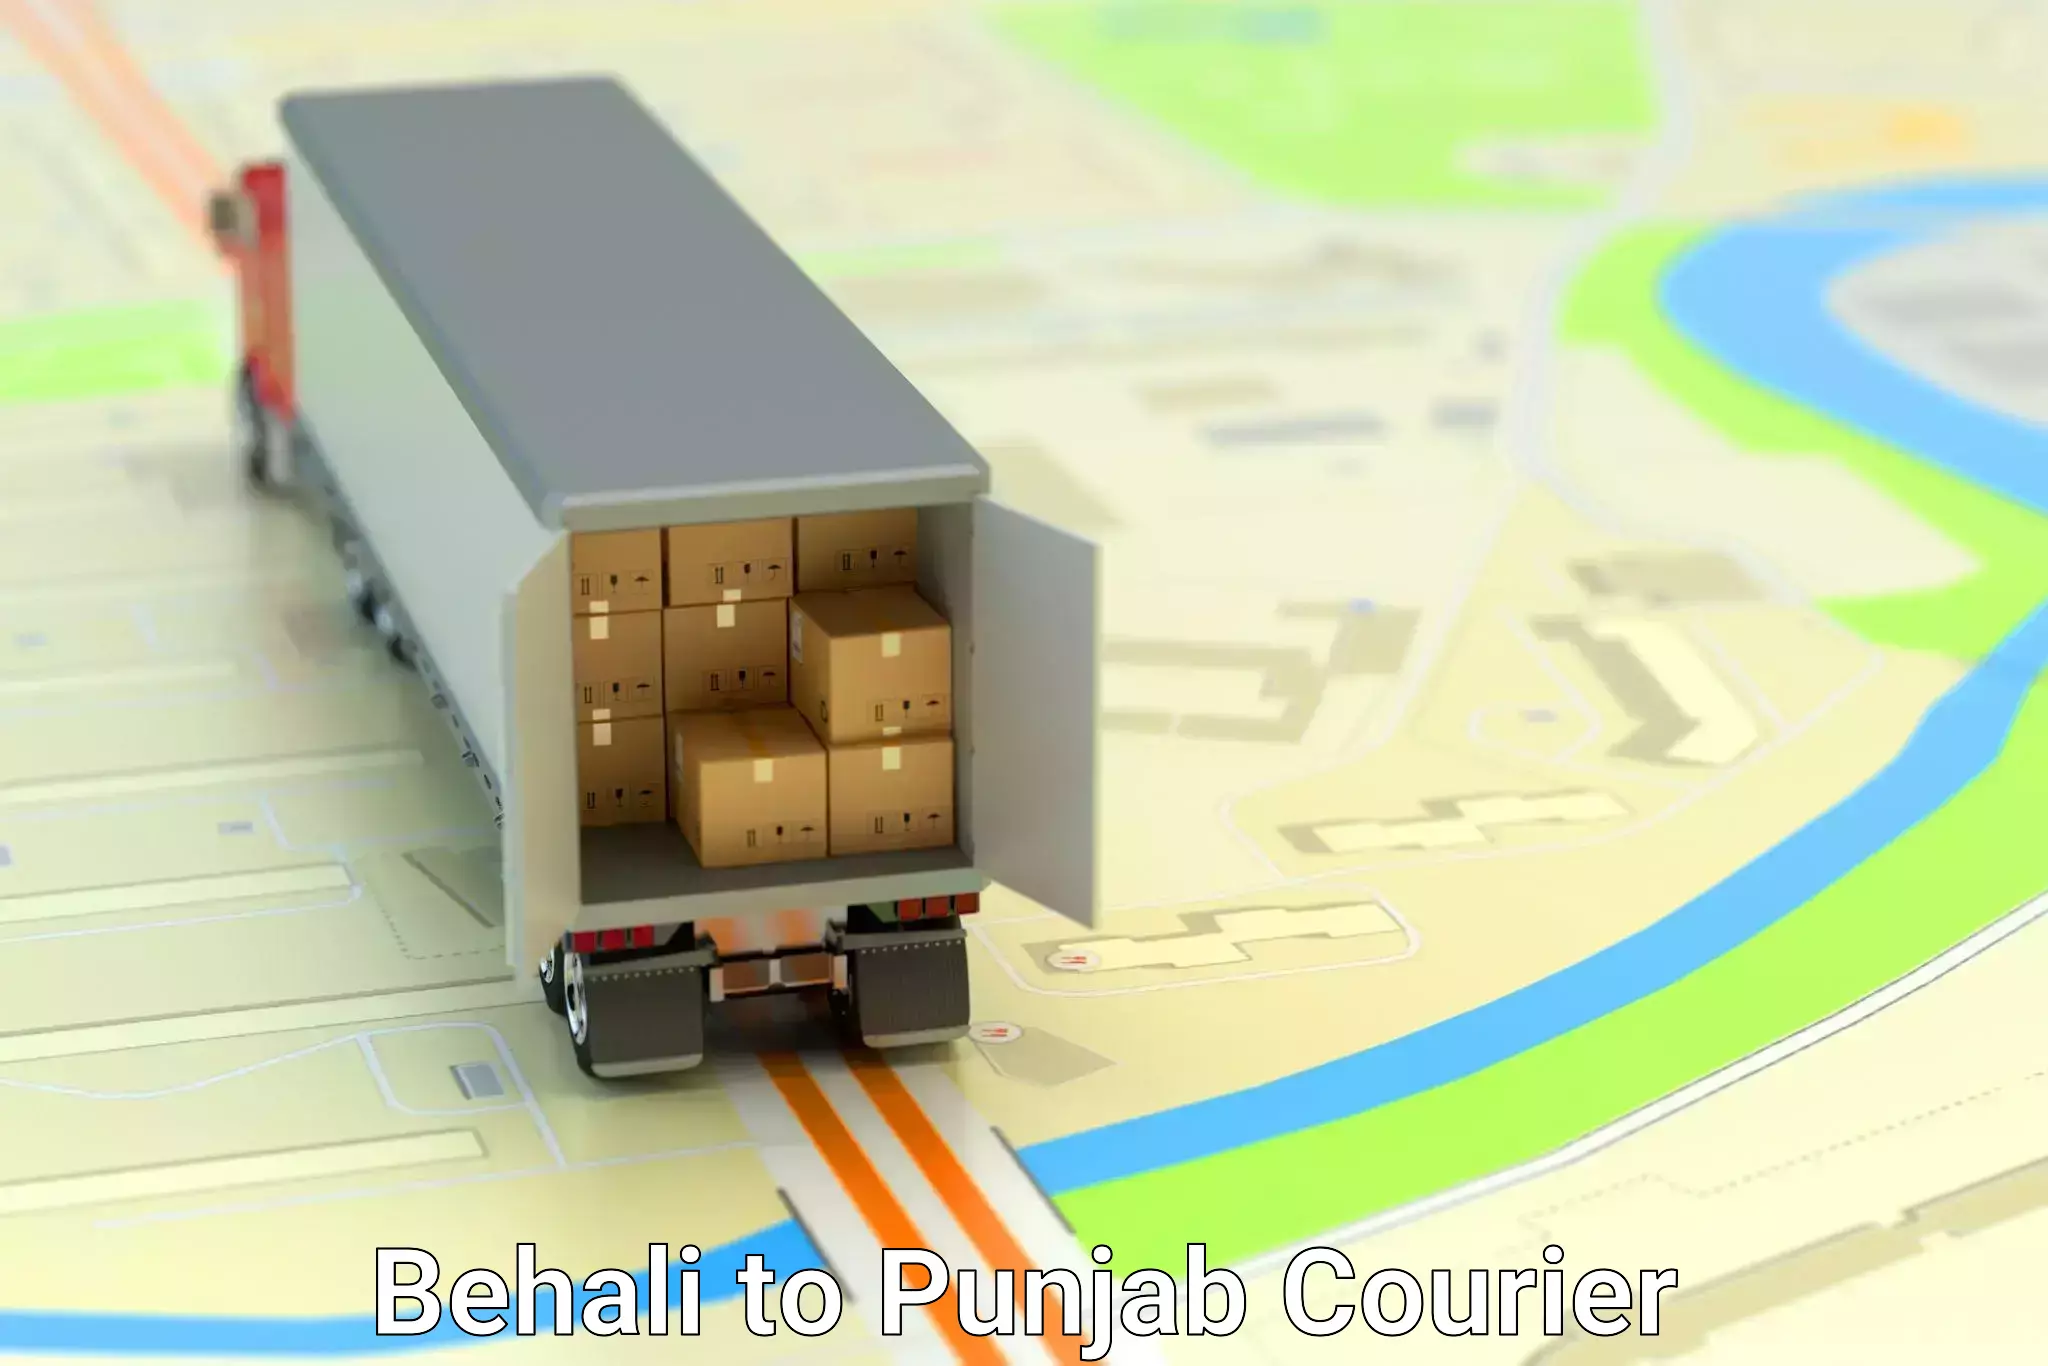 Courier service innovation Behali to Firozpur